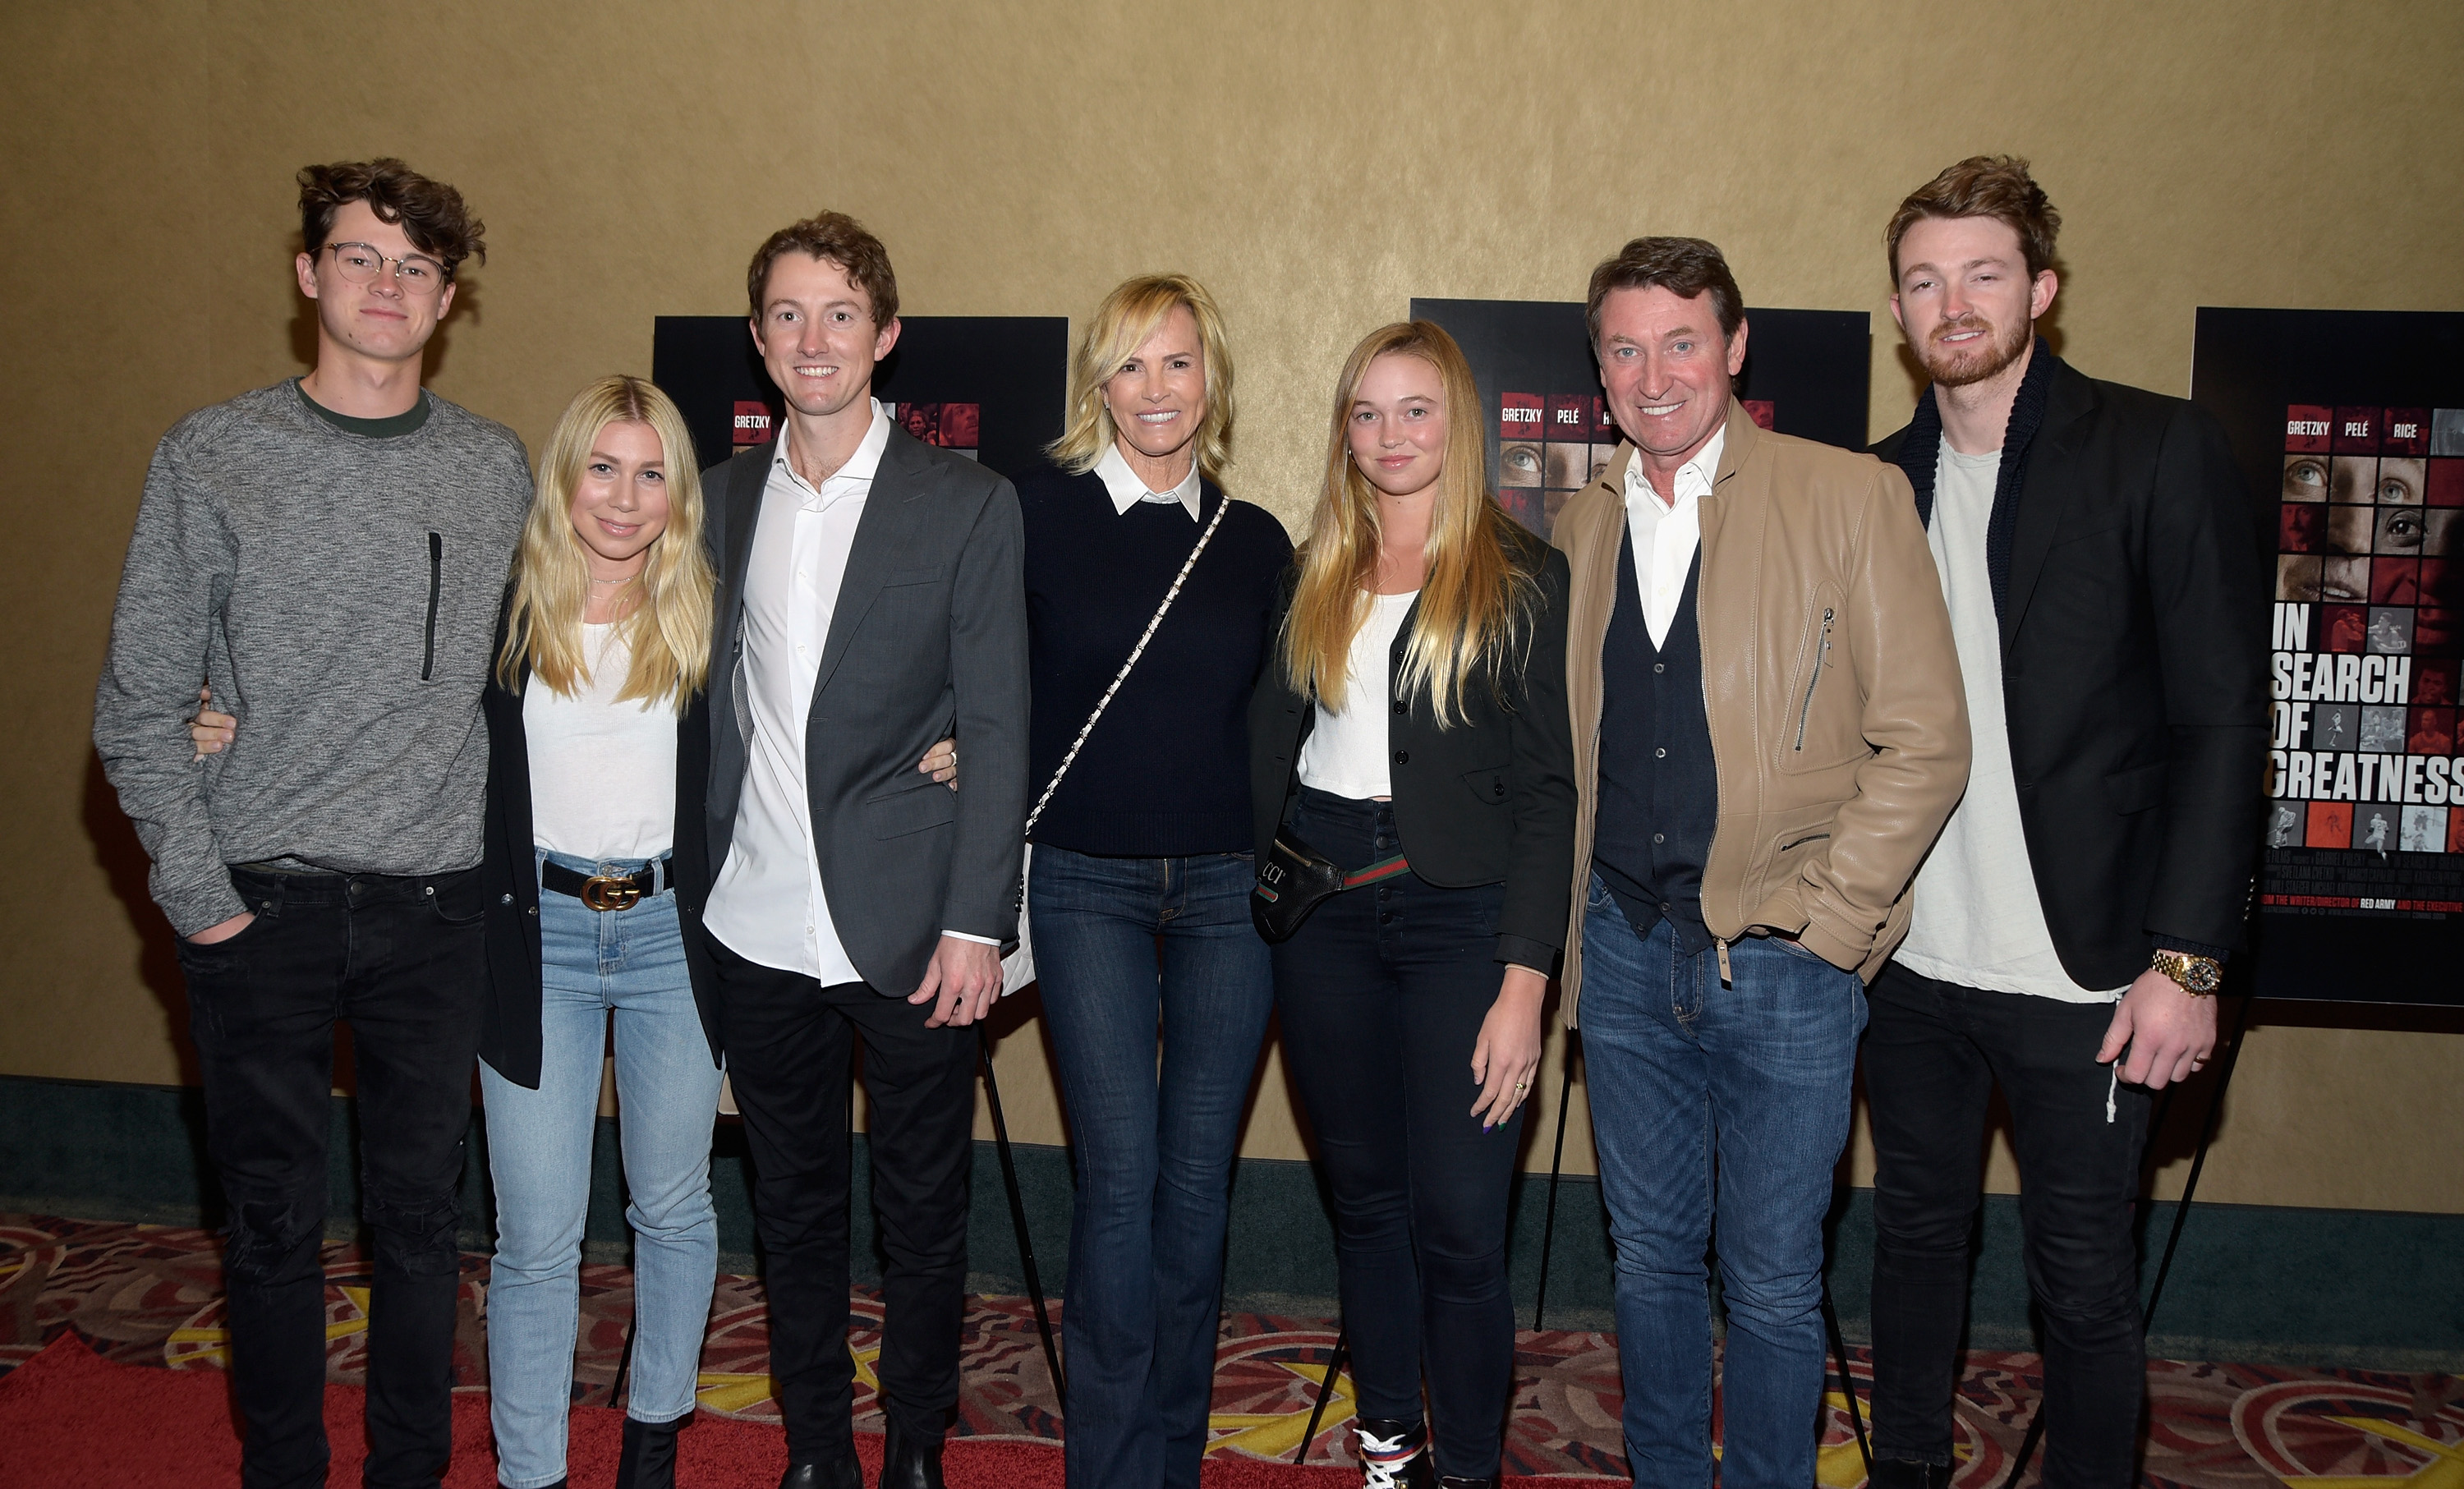 Tristan Gretsky, guest, Ty Gretzky, Janet Jones, Emma Gretzky, Wayne Gretzky, and Trevor Gretzky at the Los Angeles premiere of "In Search of Greatness" on November 1, 2018, in Century City, California | Source: Getty Images